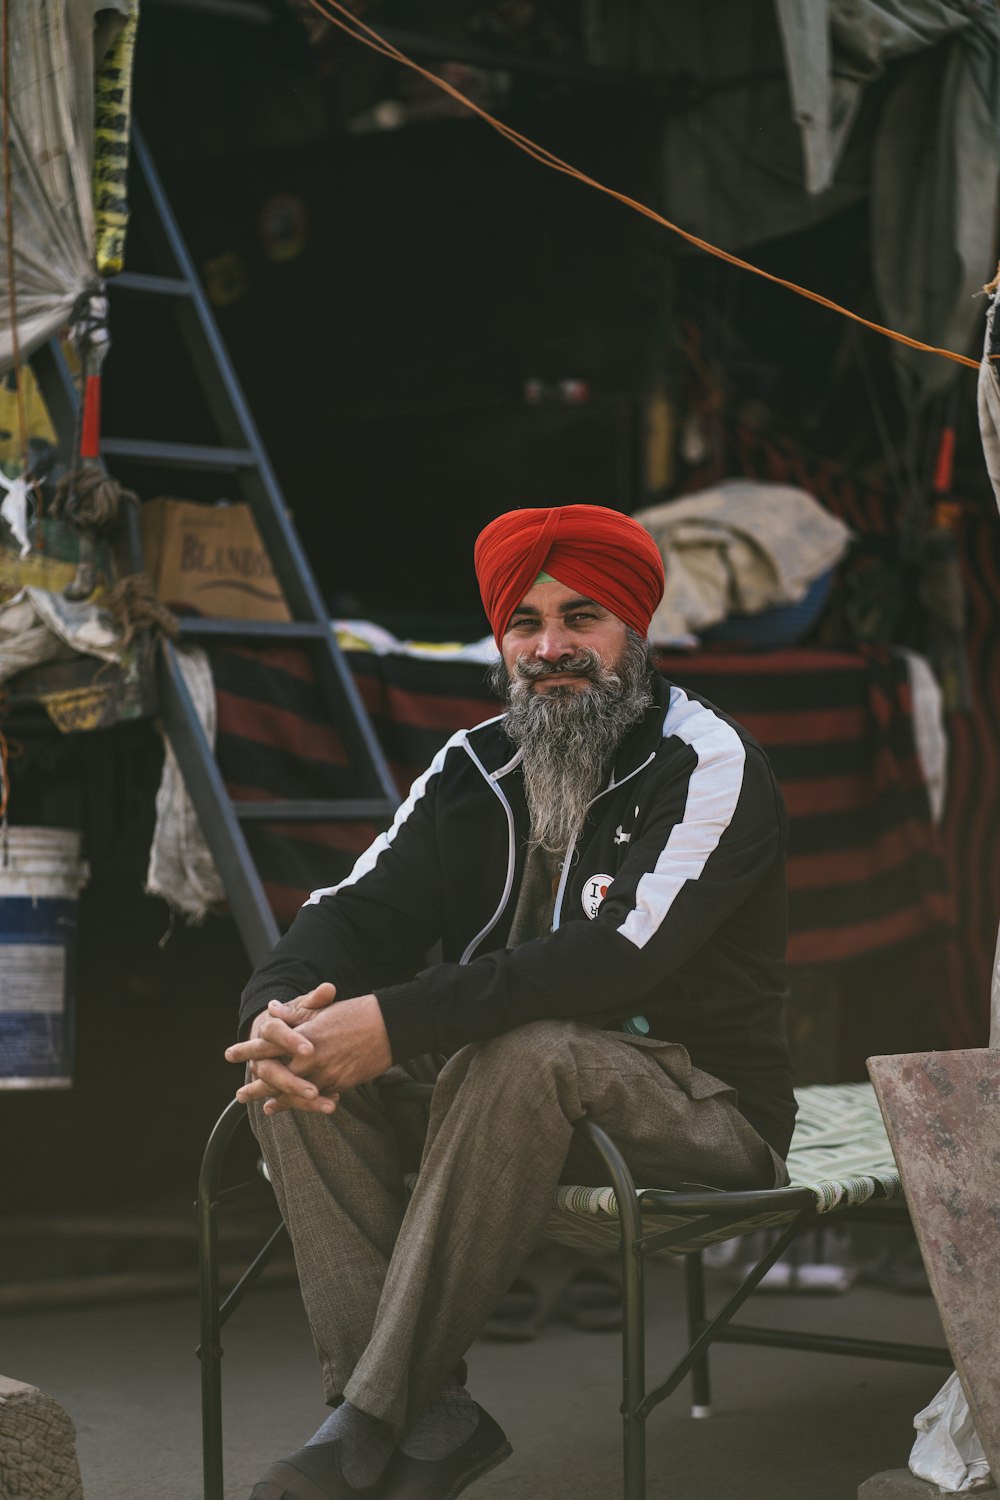 a man with a red turban sitting in a chair